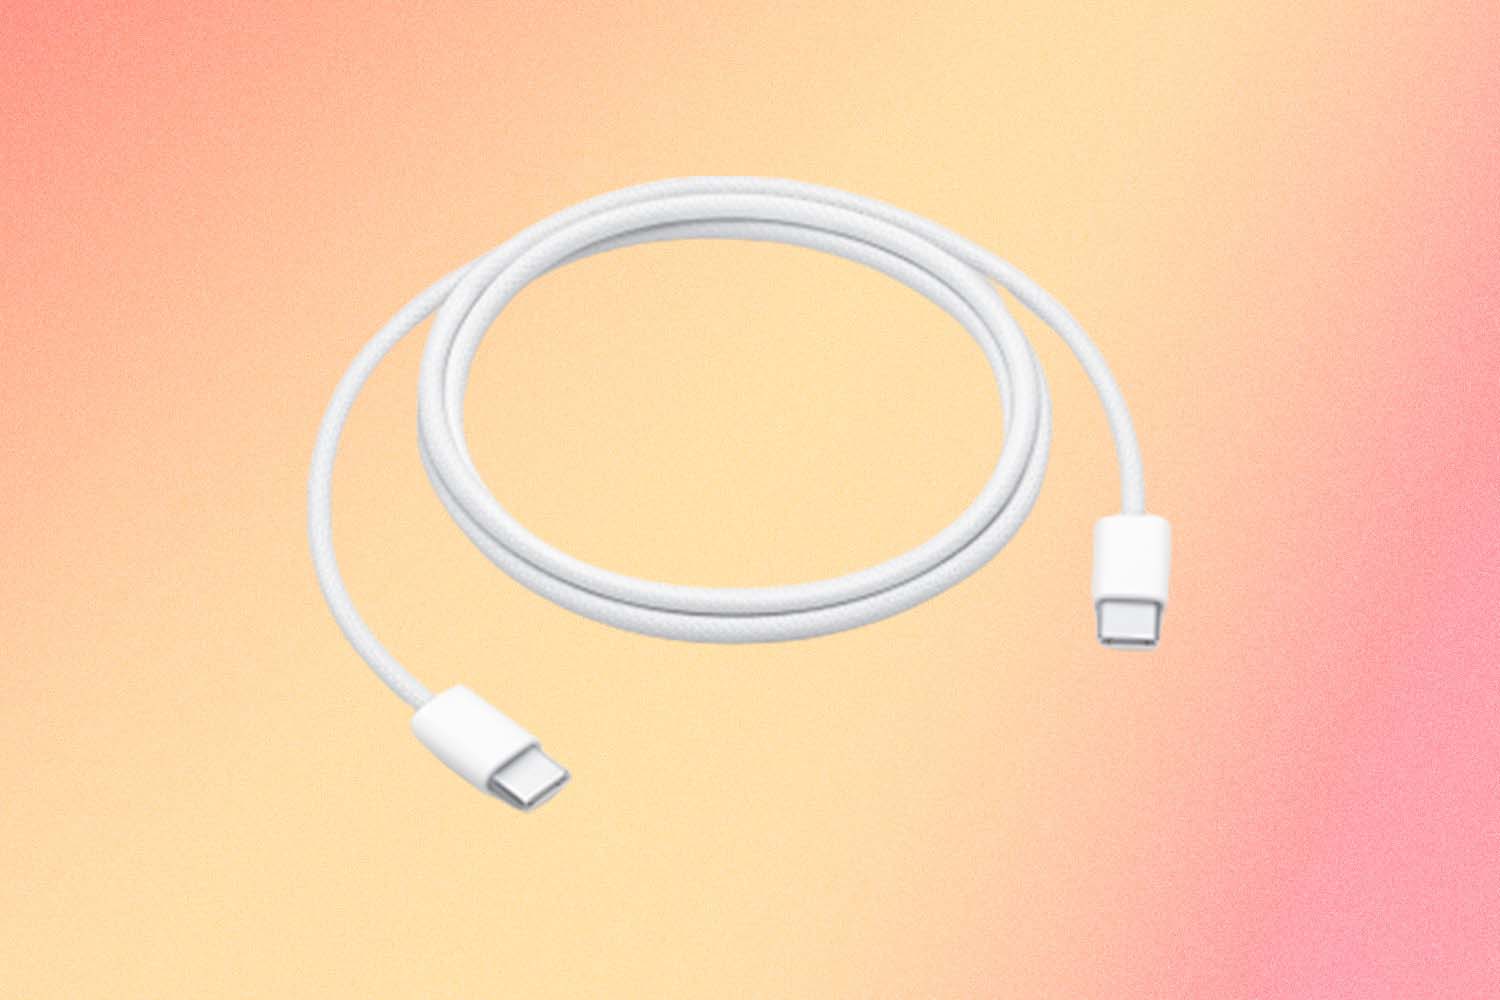 1m USB A to USB C Charging Cable Durable - USB-C Cables, Cables